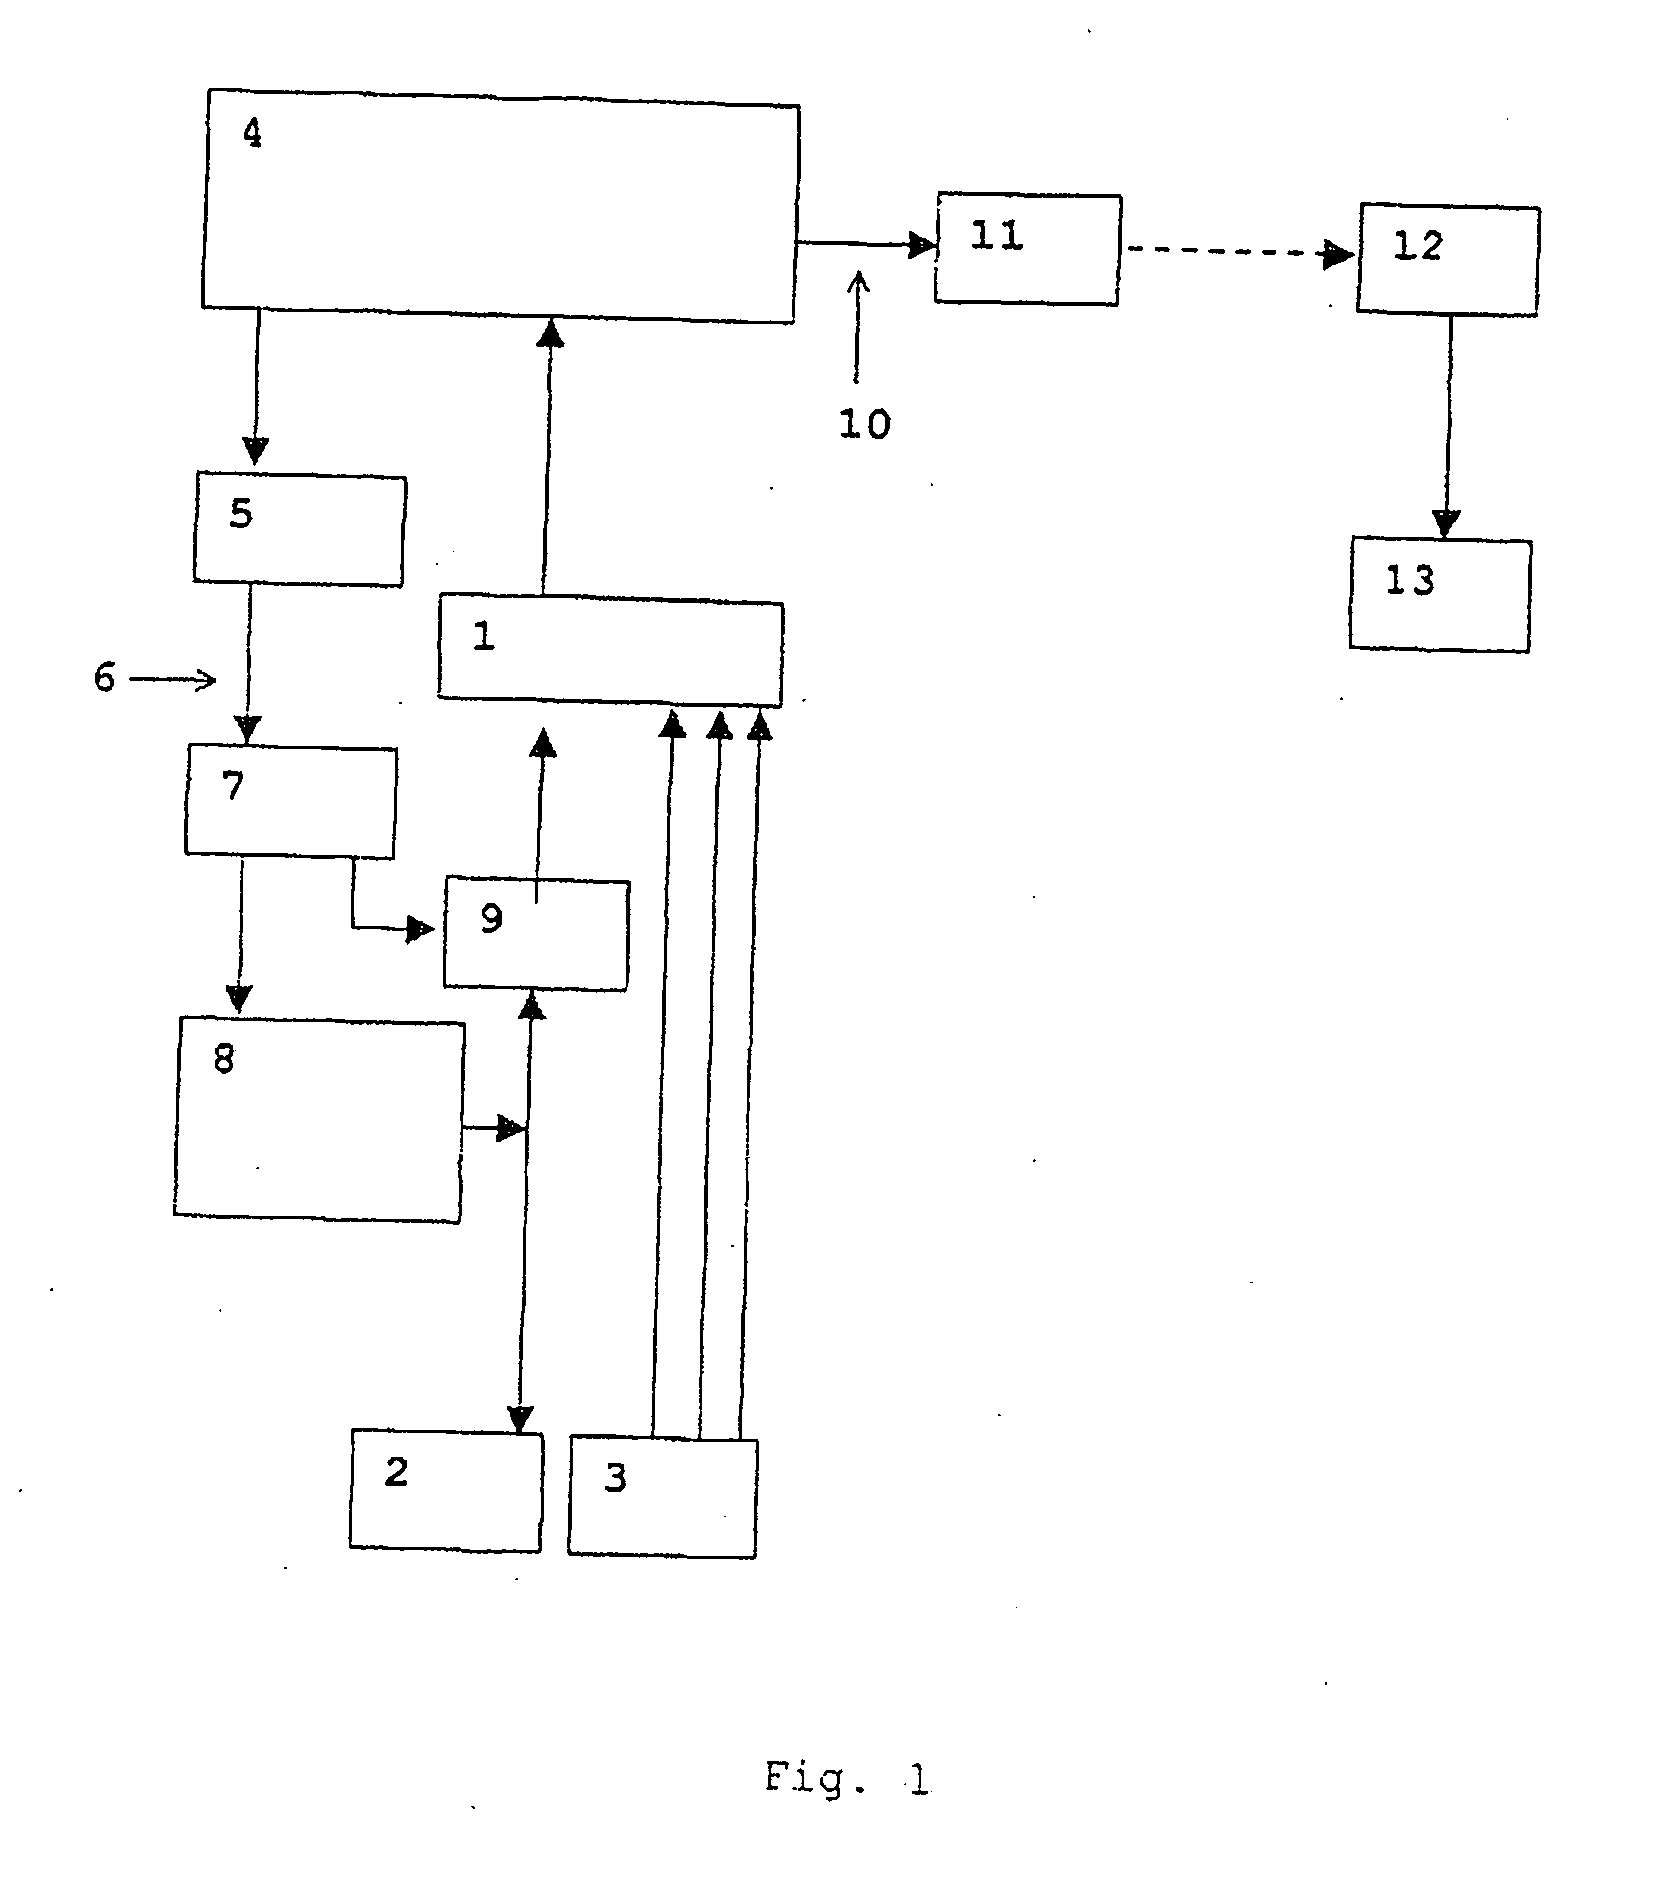 Method and device for decoupling and/or desynchronizing neural brain activity